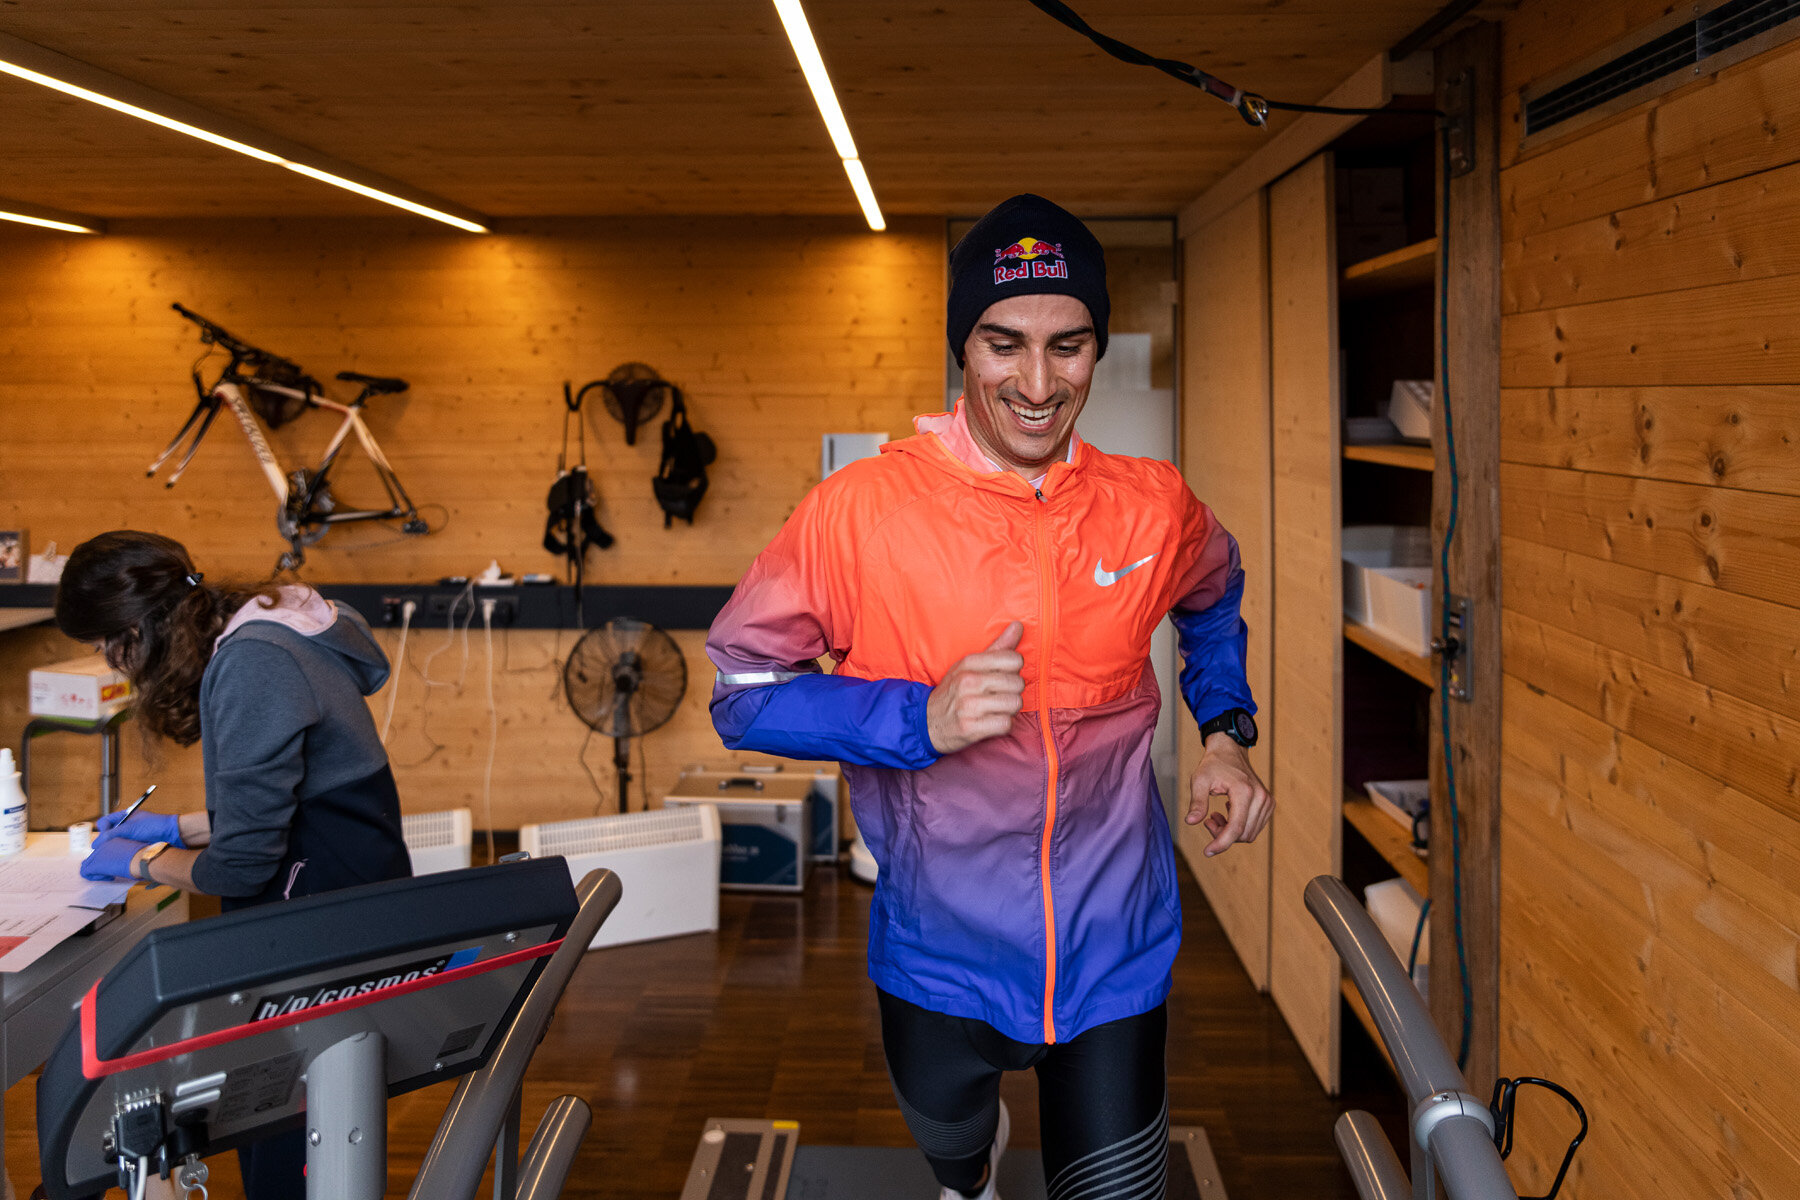  Mario Mola is seen during his training and preparations at the APC Athlete Performance Center in Thalgau on December 9, 2019 